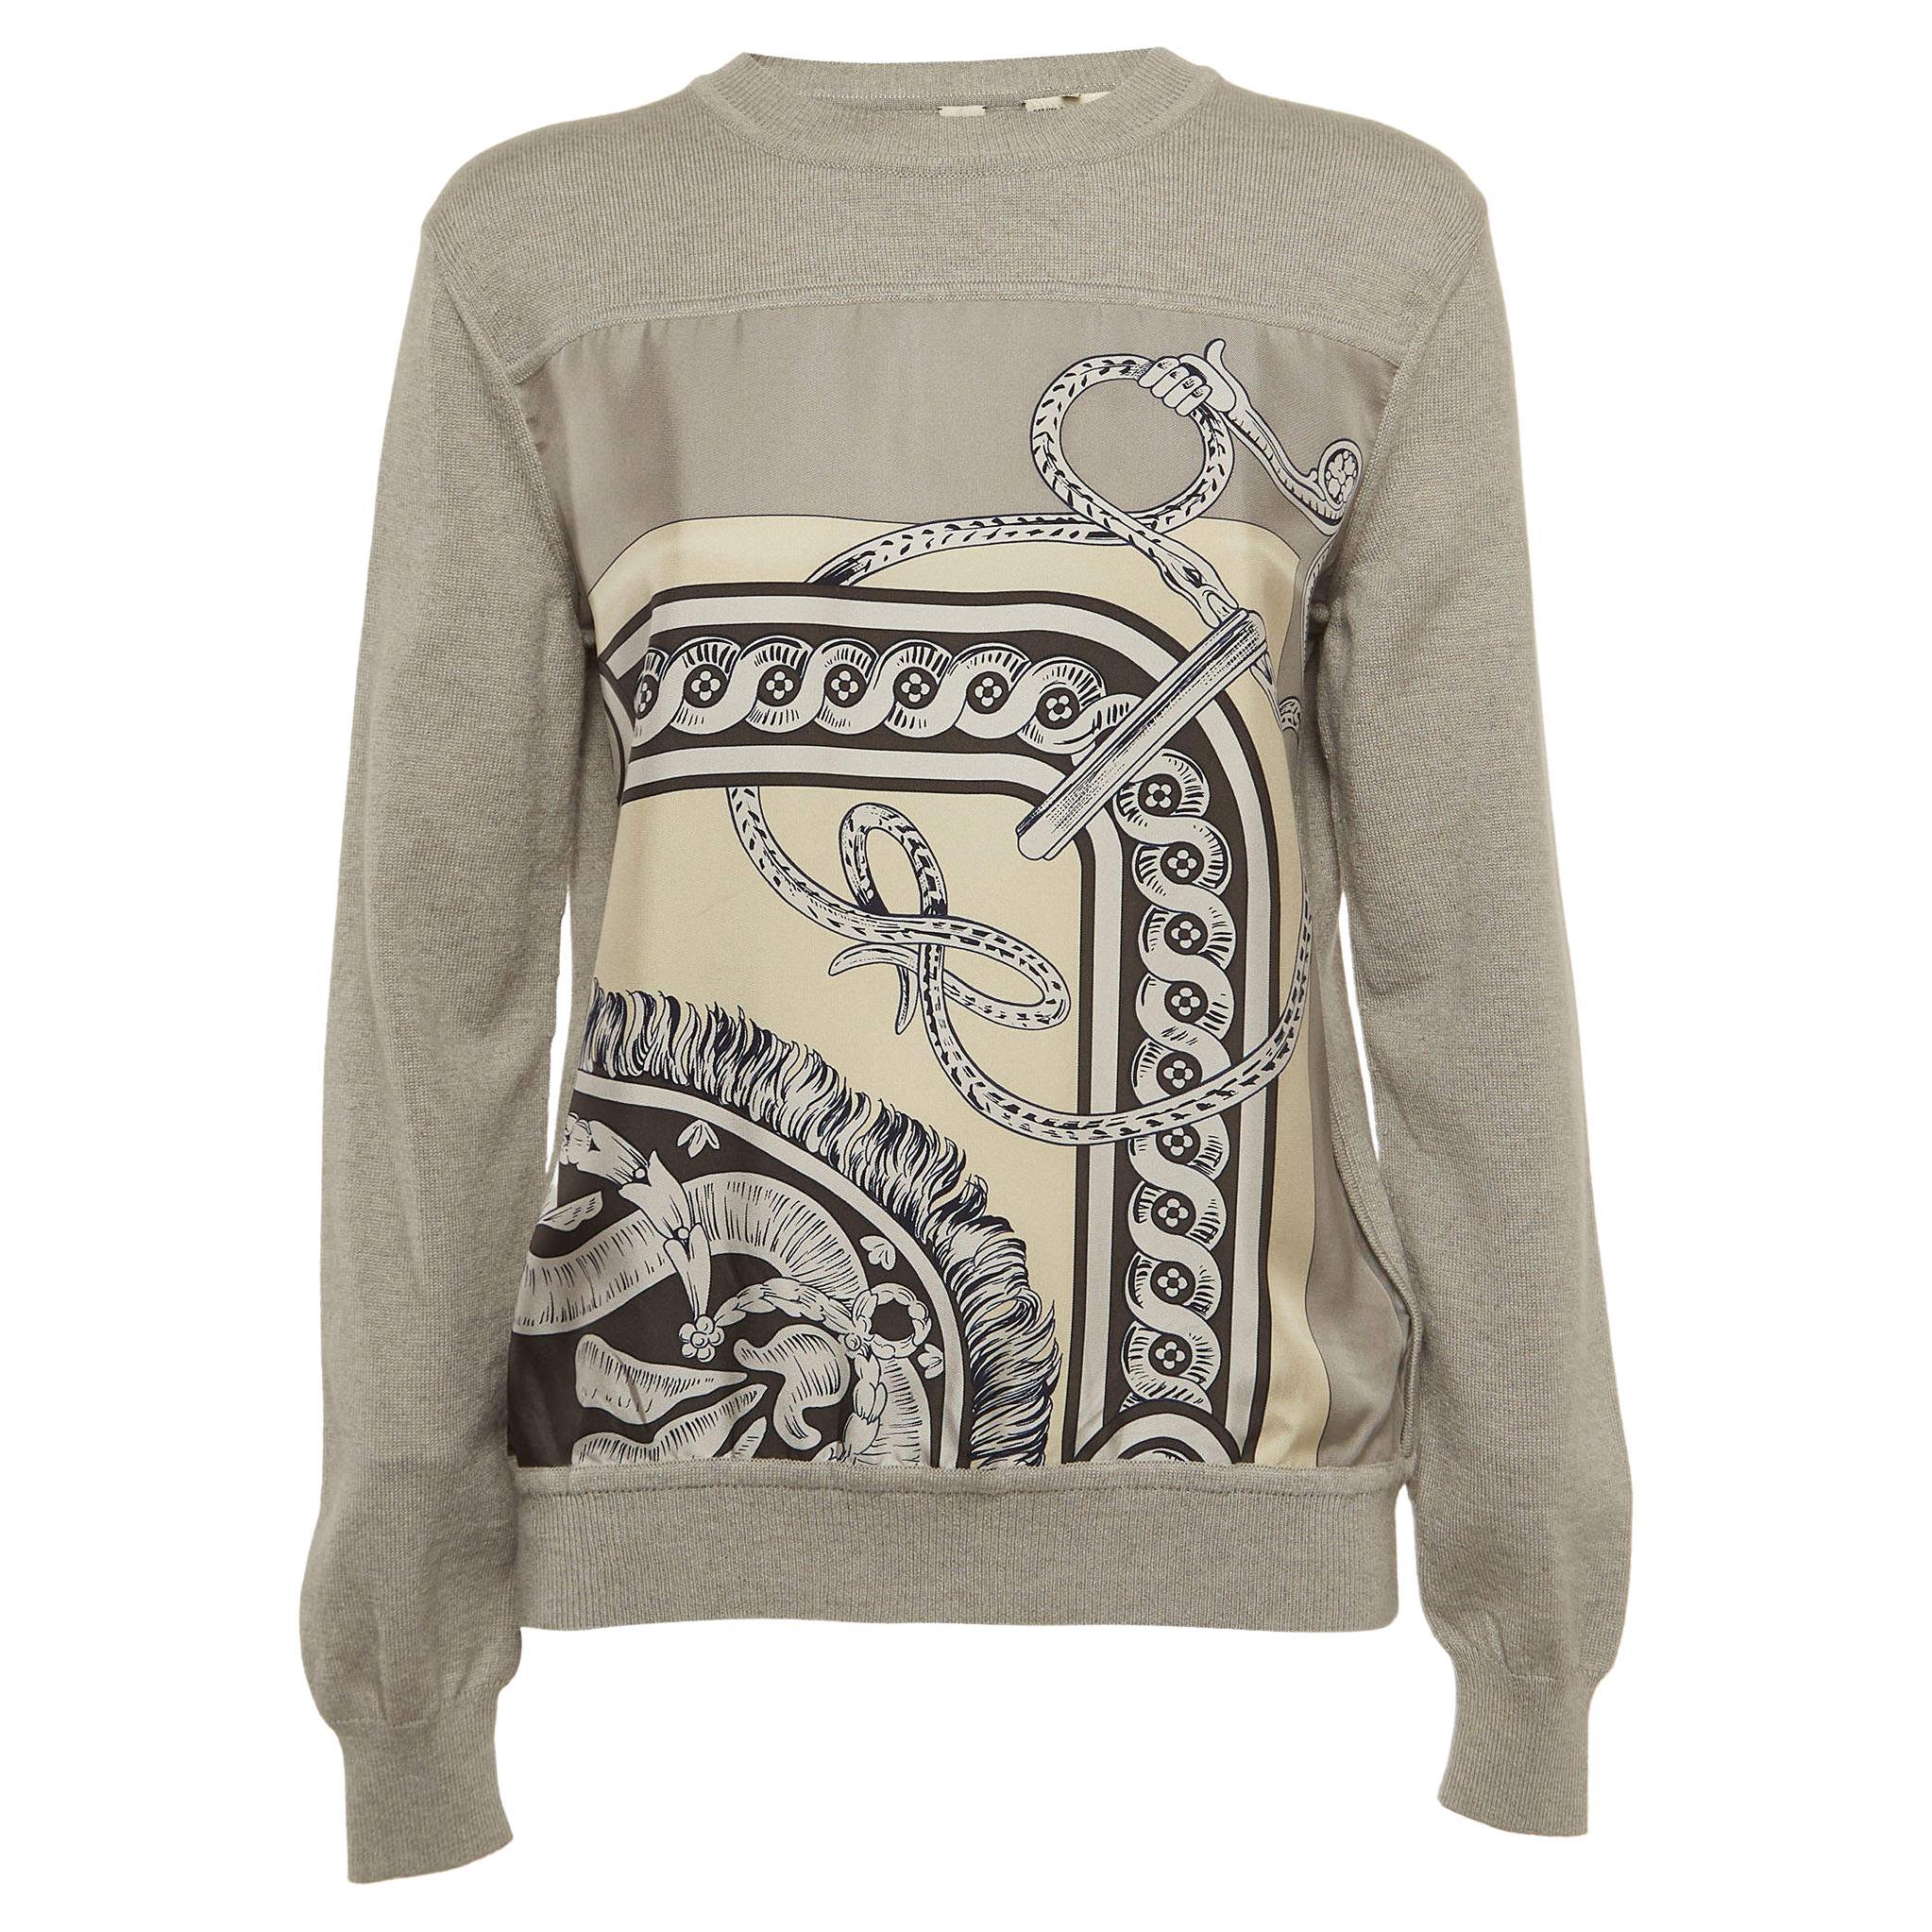 Hermes Grey Printed Silk and Cashmere Crew Neck Sweatshirt M For Sale